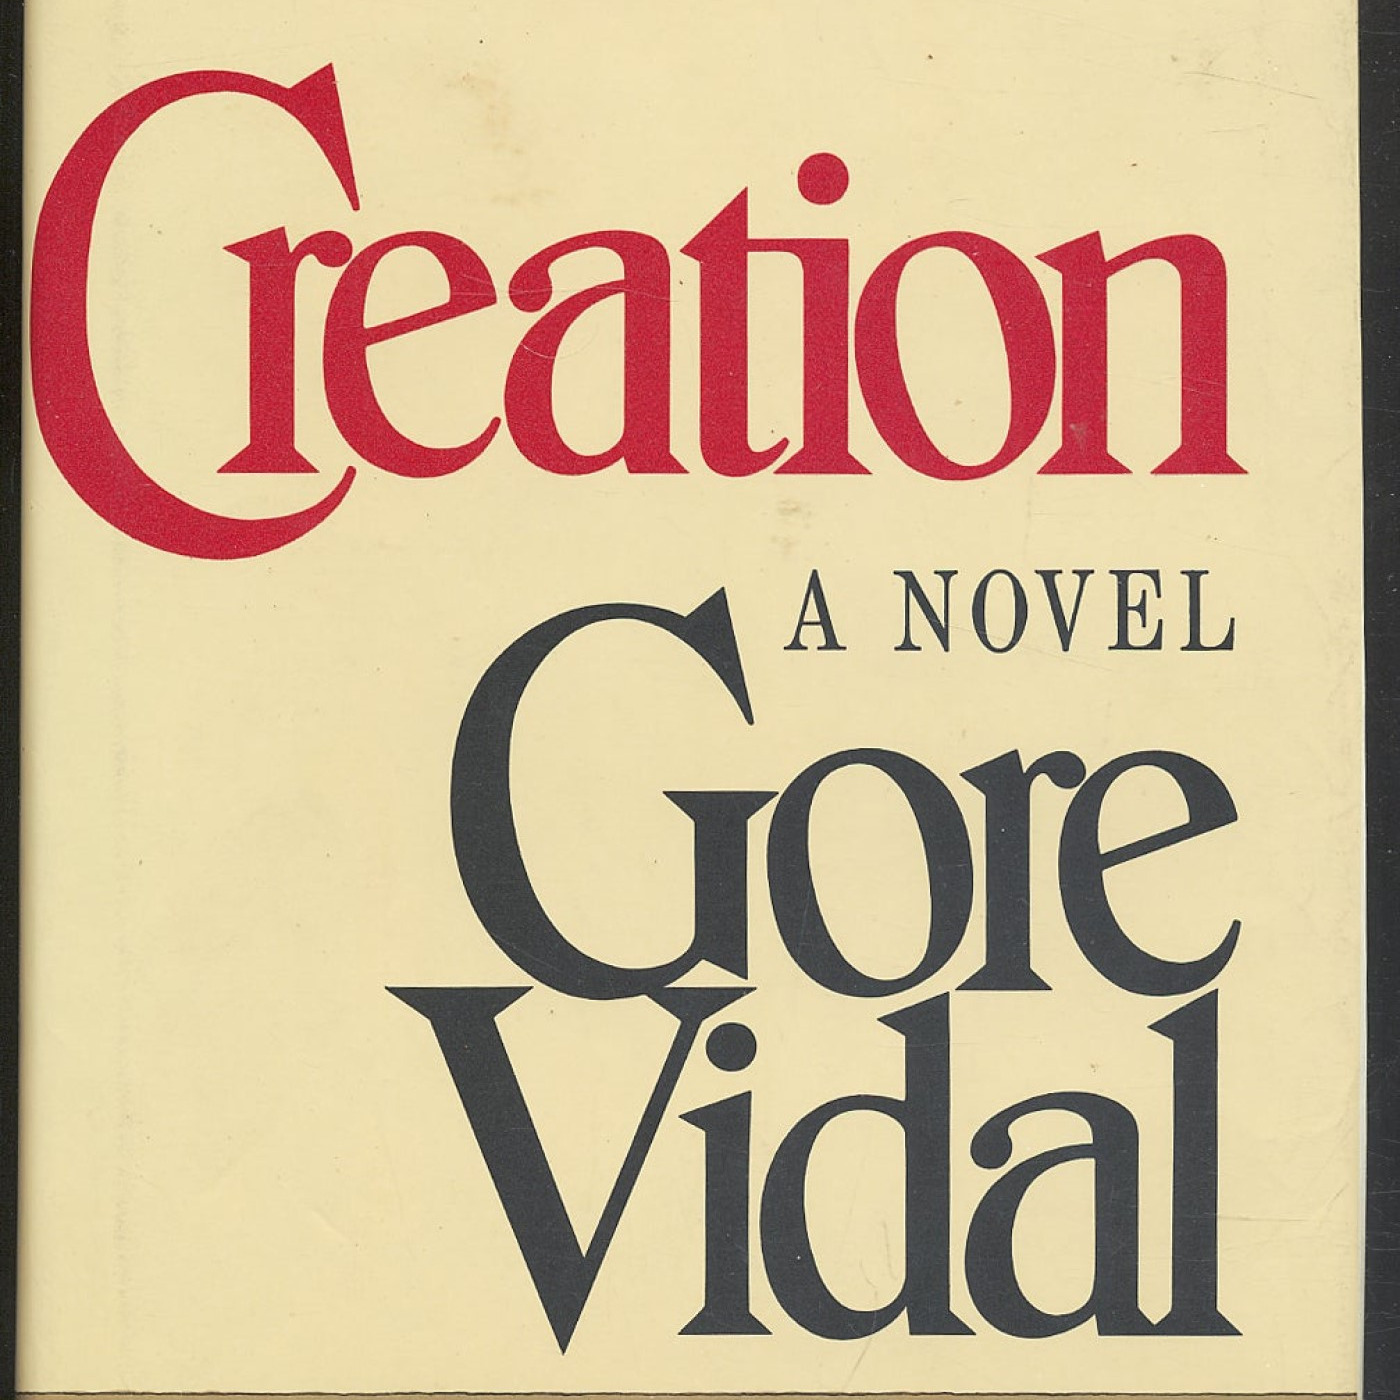 [Ex] Creation by Gore Vidal - Swords Sorcery & Socialism Crossover Part 1